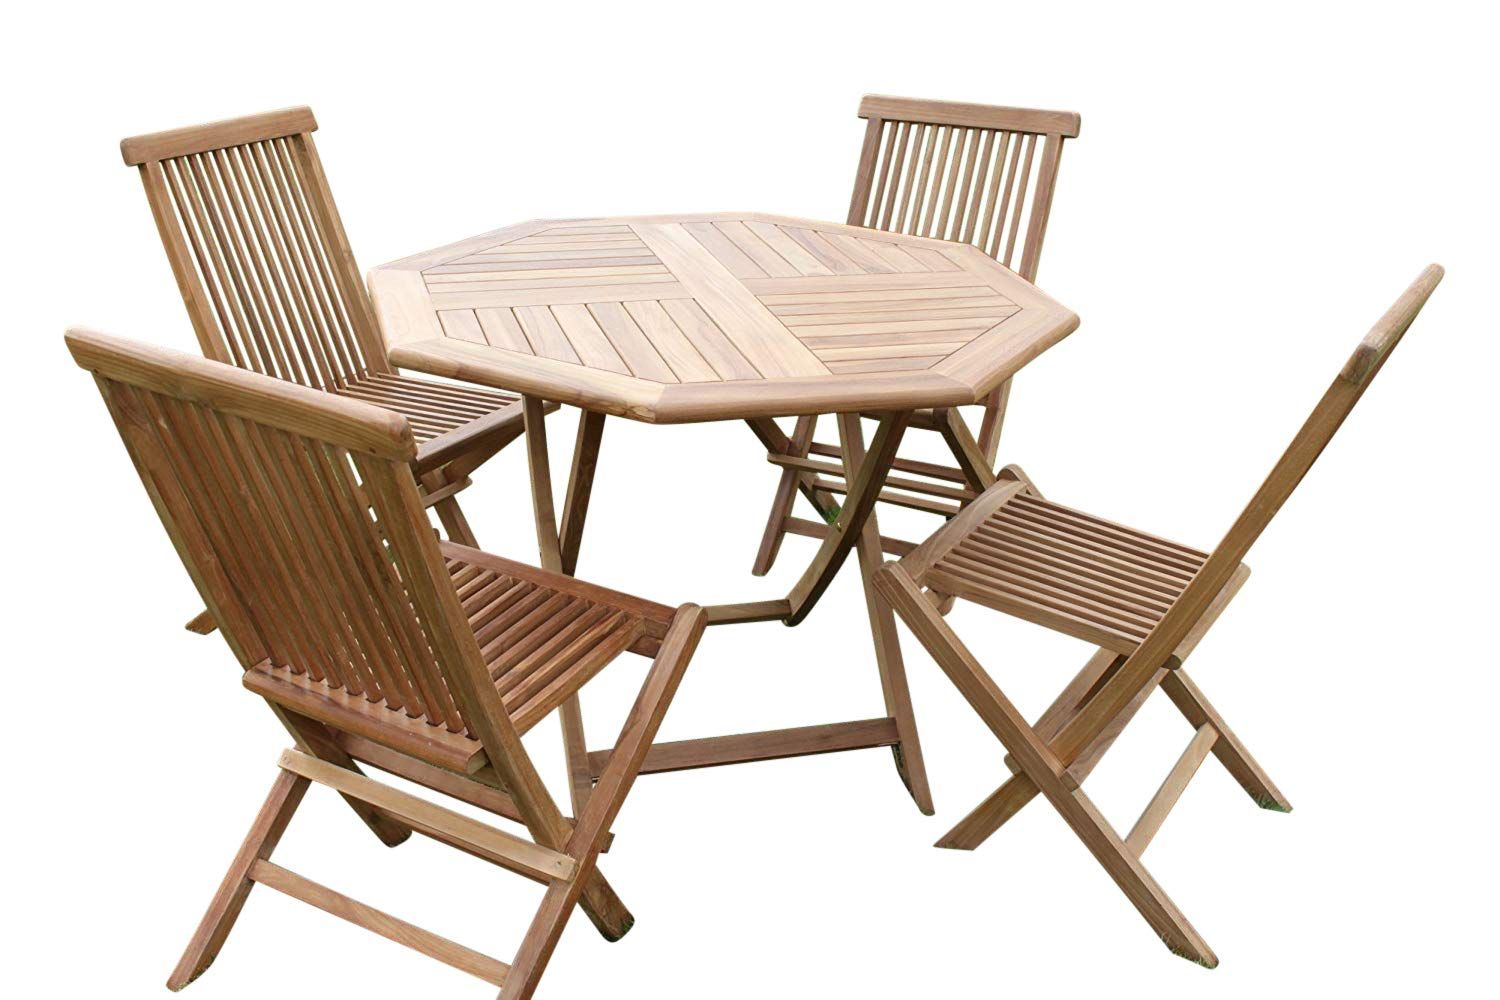 Solid Teak Octagonal Garden Dining Table And 4 Folding Chairs – Garden In Teak Folding Chair Patio Dining Sets (View 8 of 15)